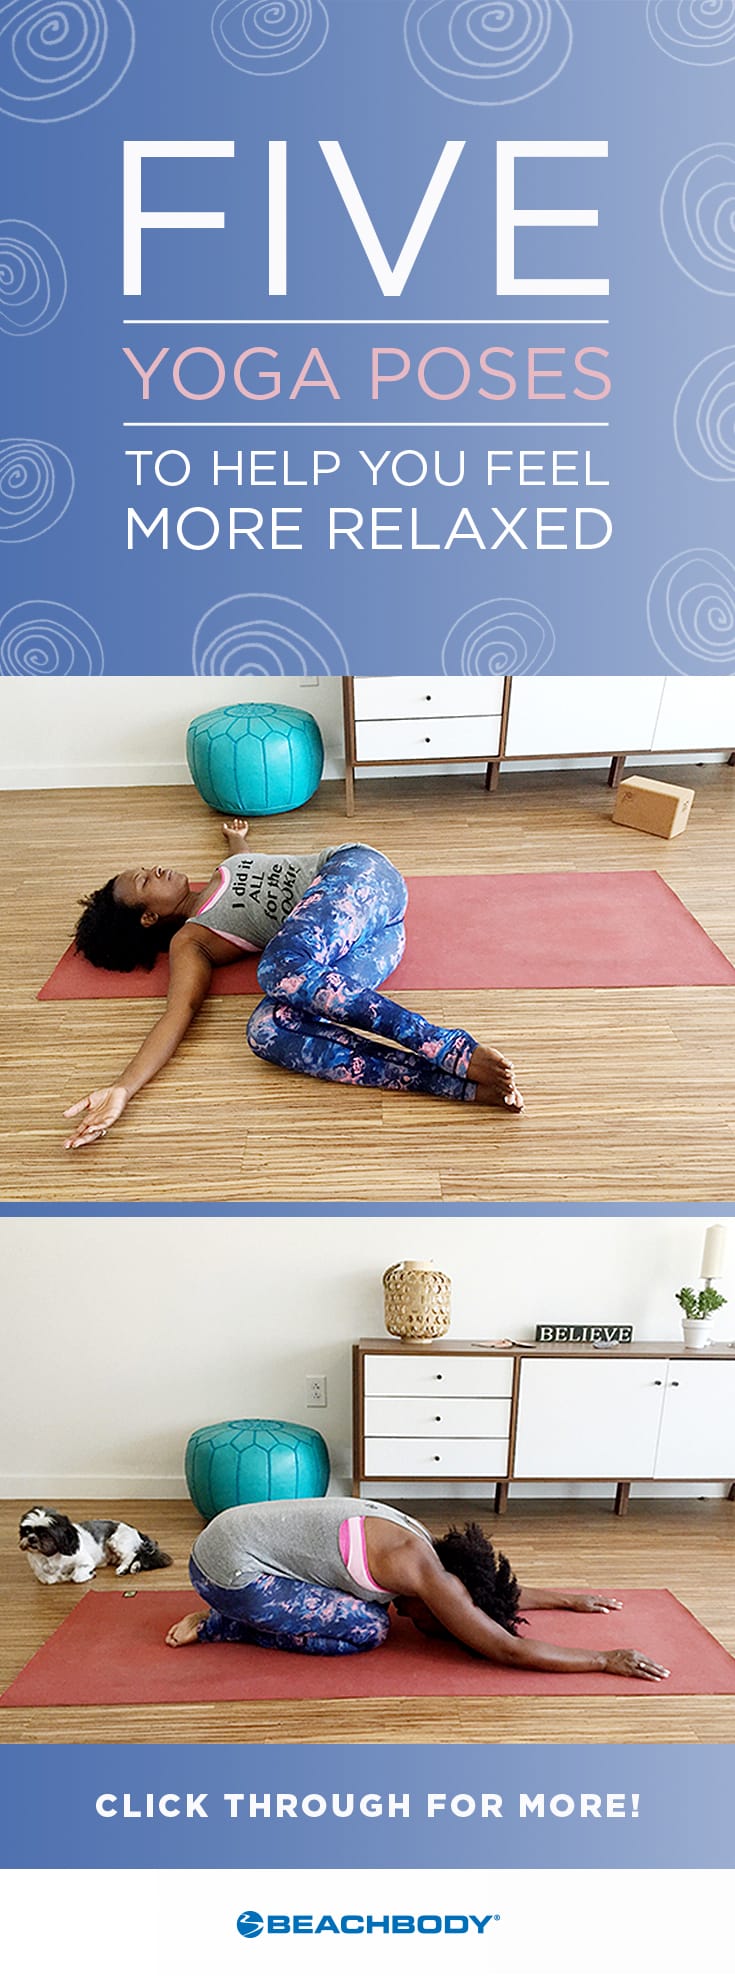 Yoga Poses to Help You Feel More Relaxed